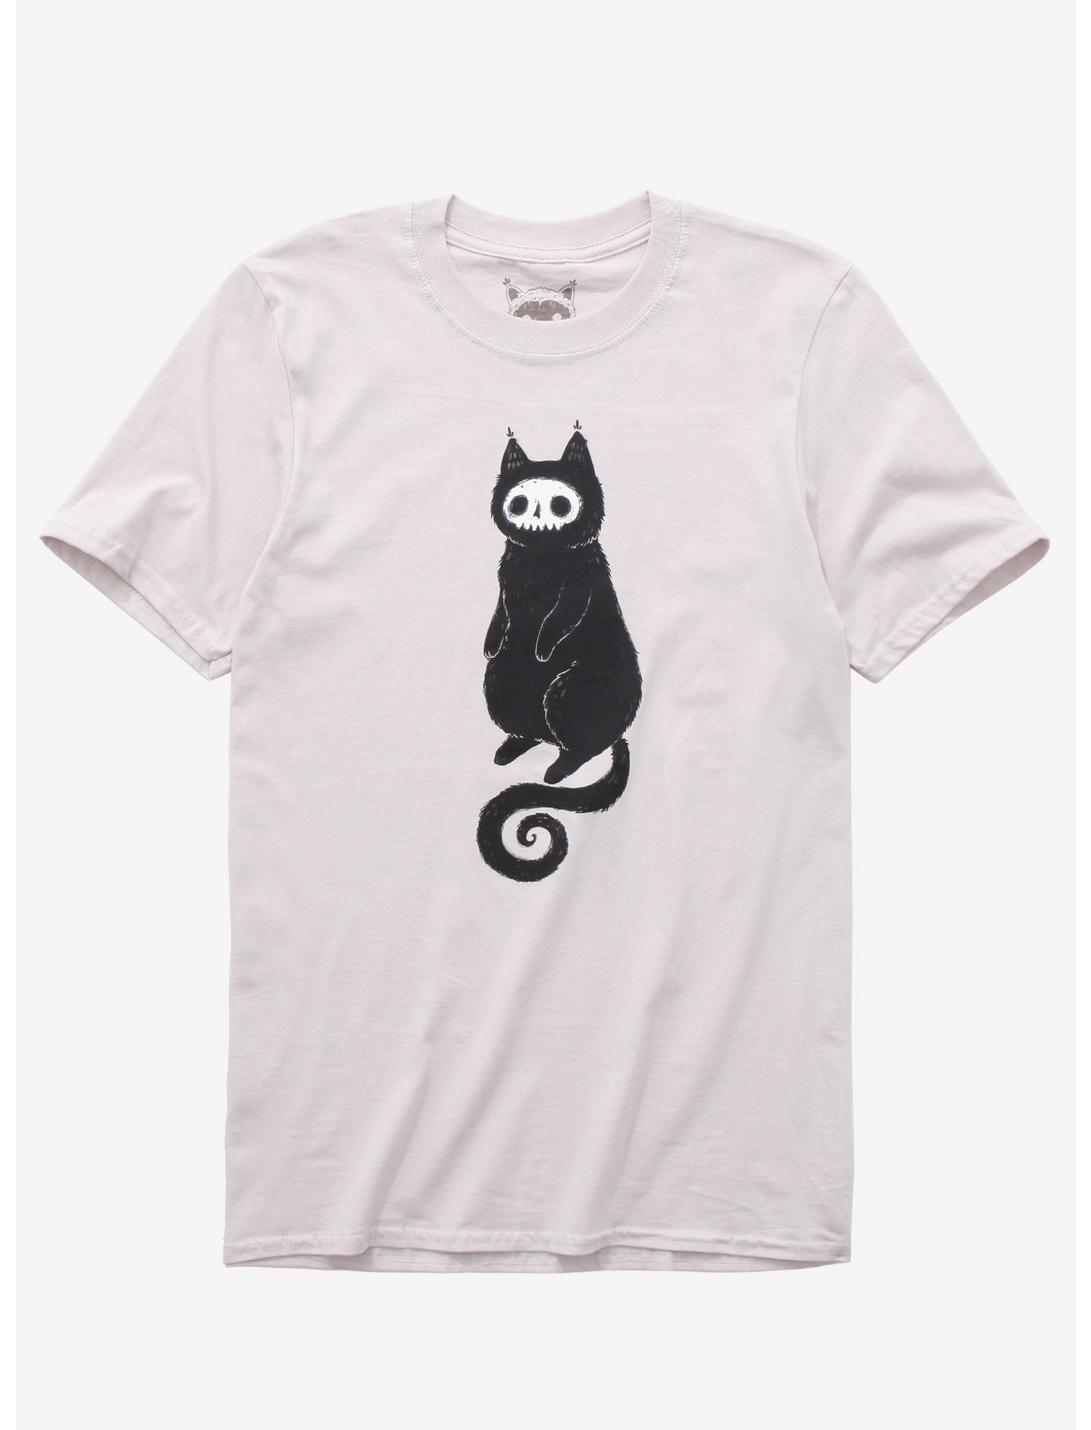 Curly Tail T-Shirt By Guild Of Calamity, MULTI, hi-res